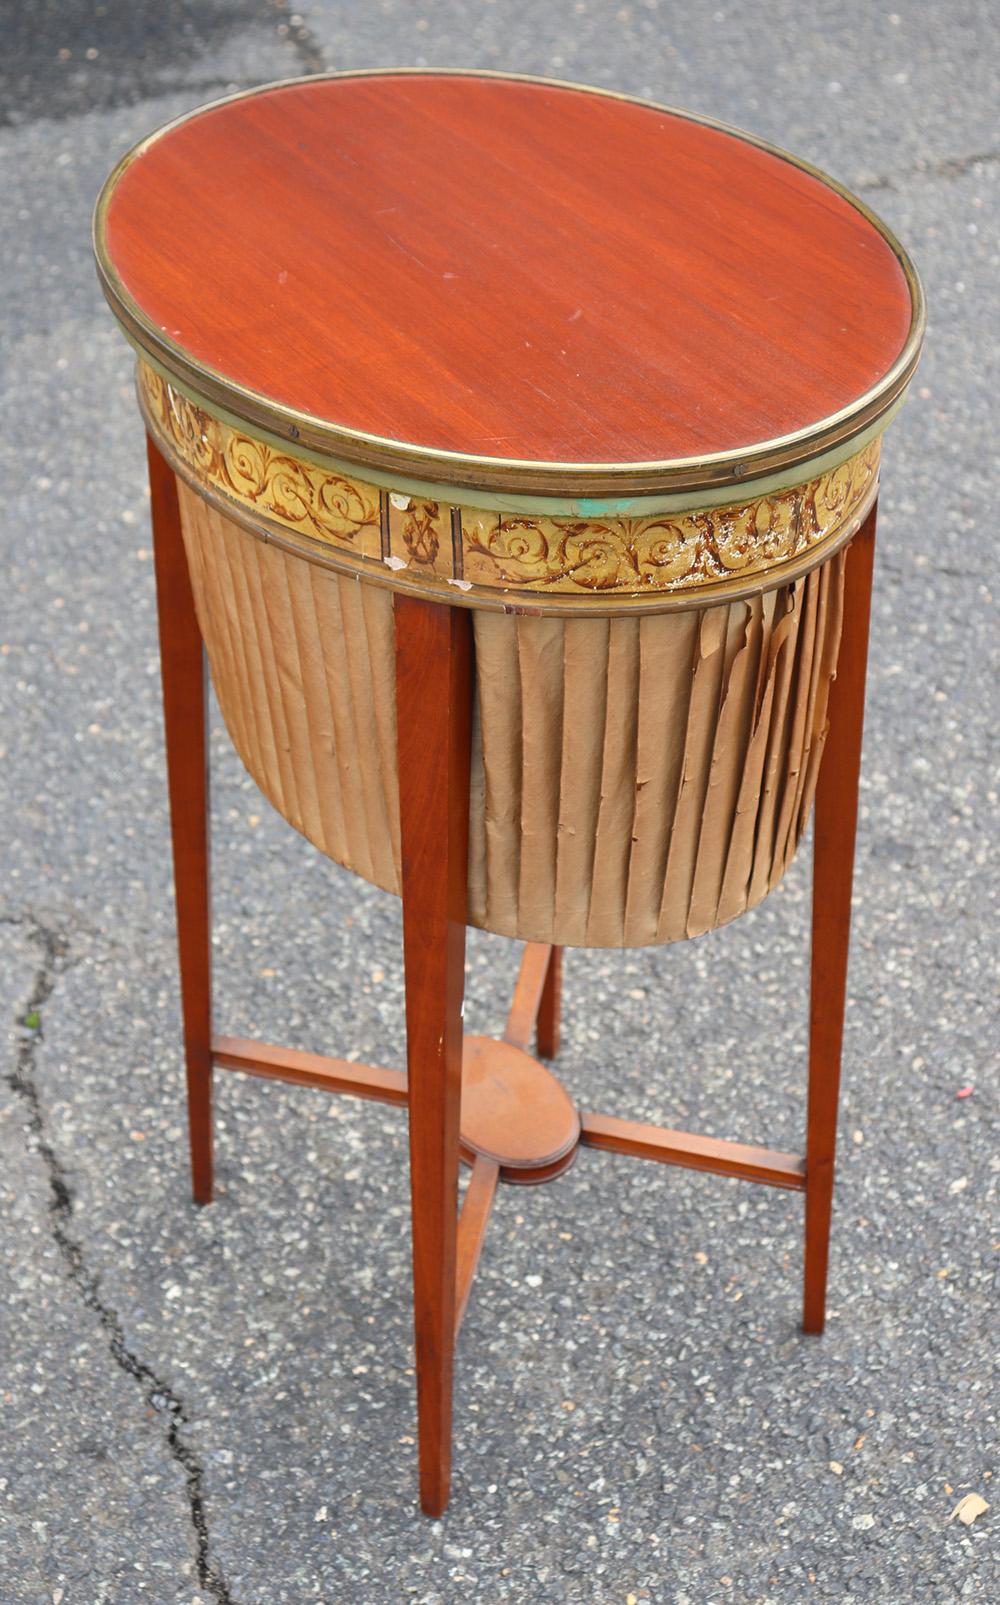 English Regency Mahogany and Satinwood Sewing Stand with Silk Basket C1890 5